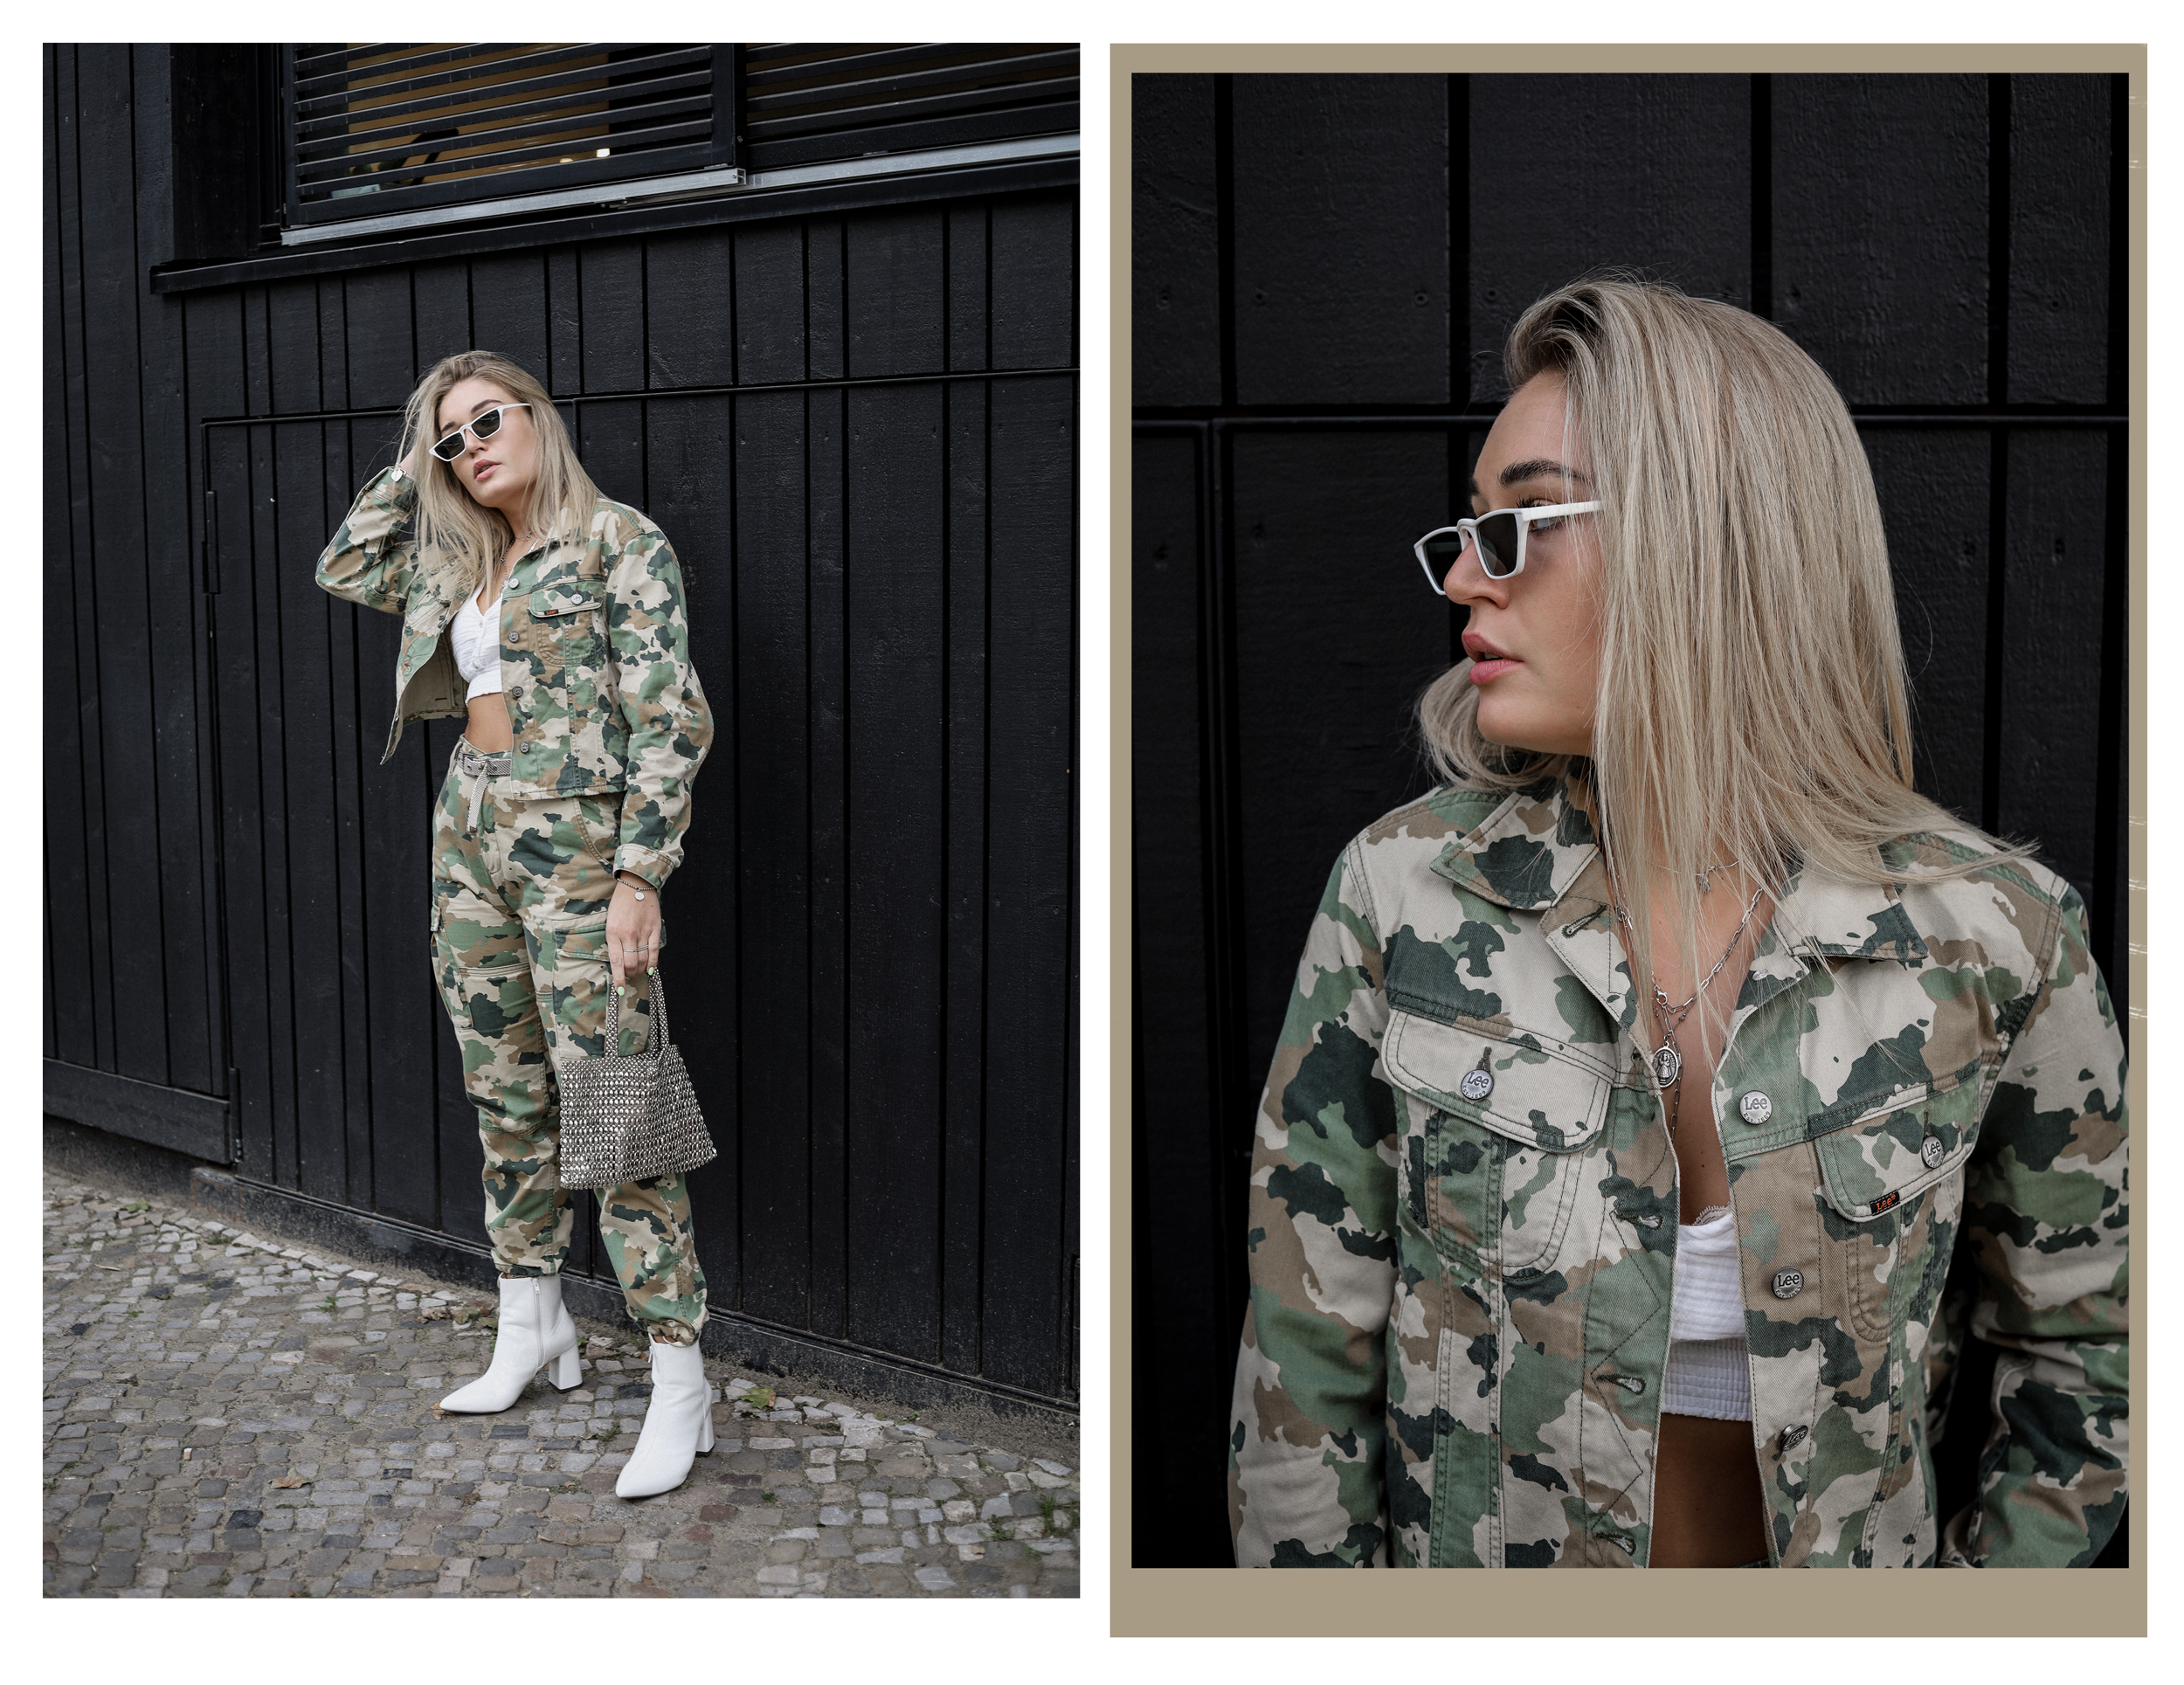 lauralamode-fashion-fashion blog-outfit-ootd-look-streetstyle-style-inspo-look-military-style-berlin-munich-nakd-military trend-trend report-blogger-deutschland